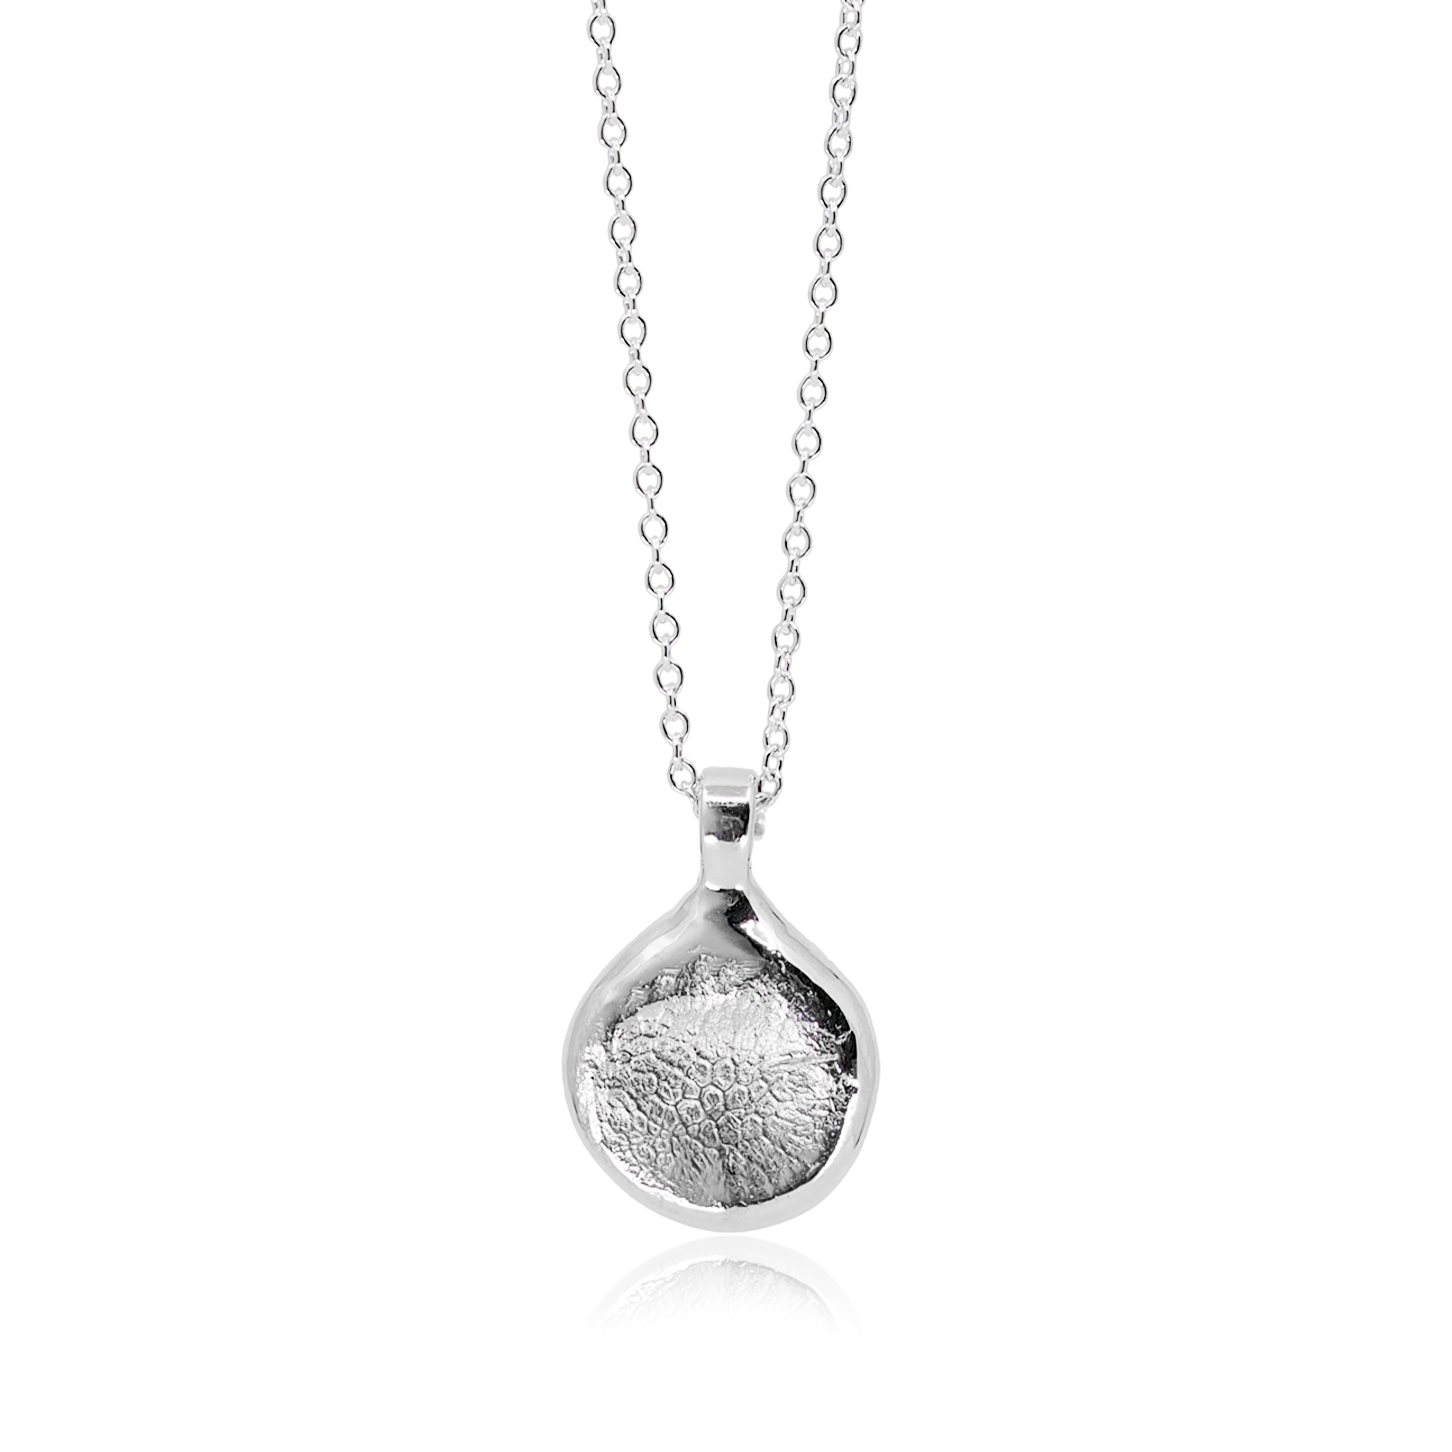 Pet Impression Necklace in Sterling Silver